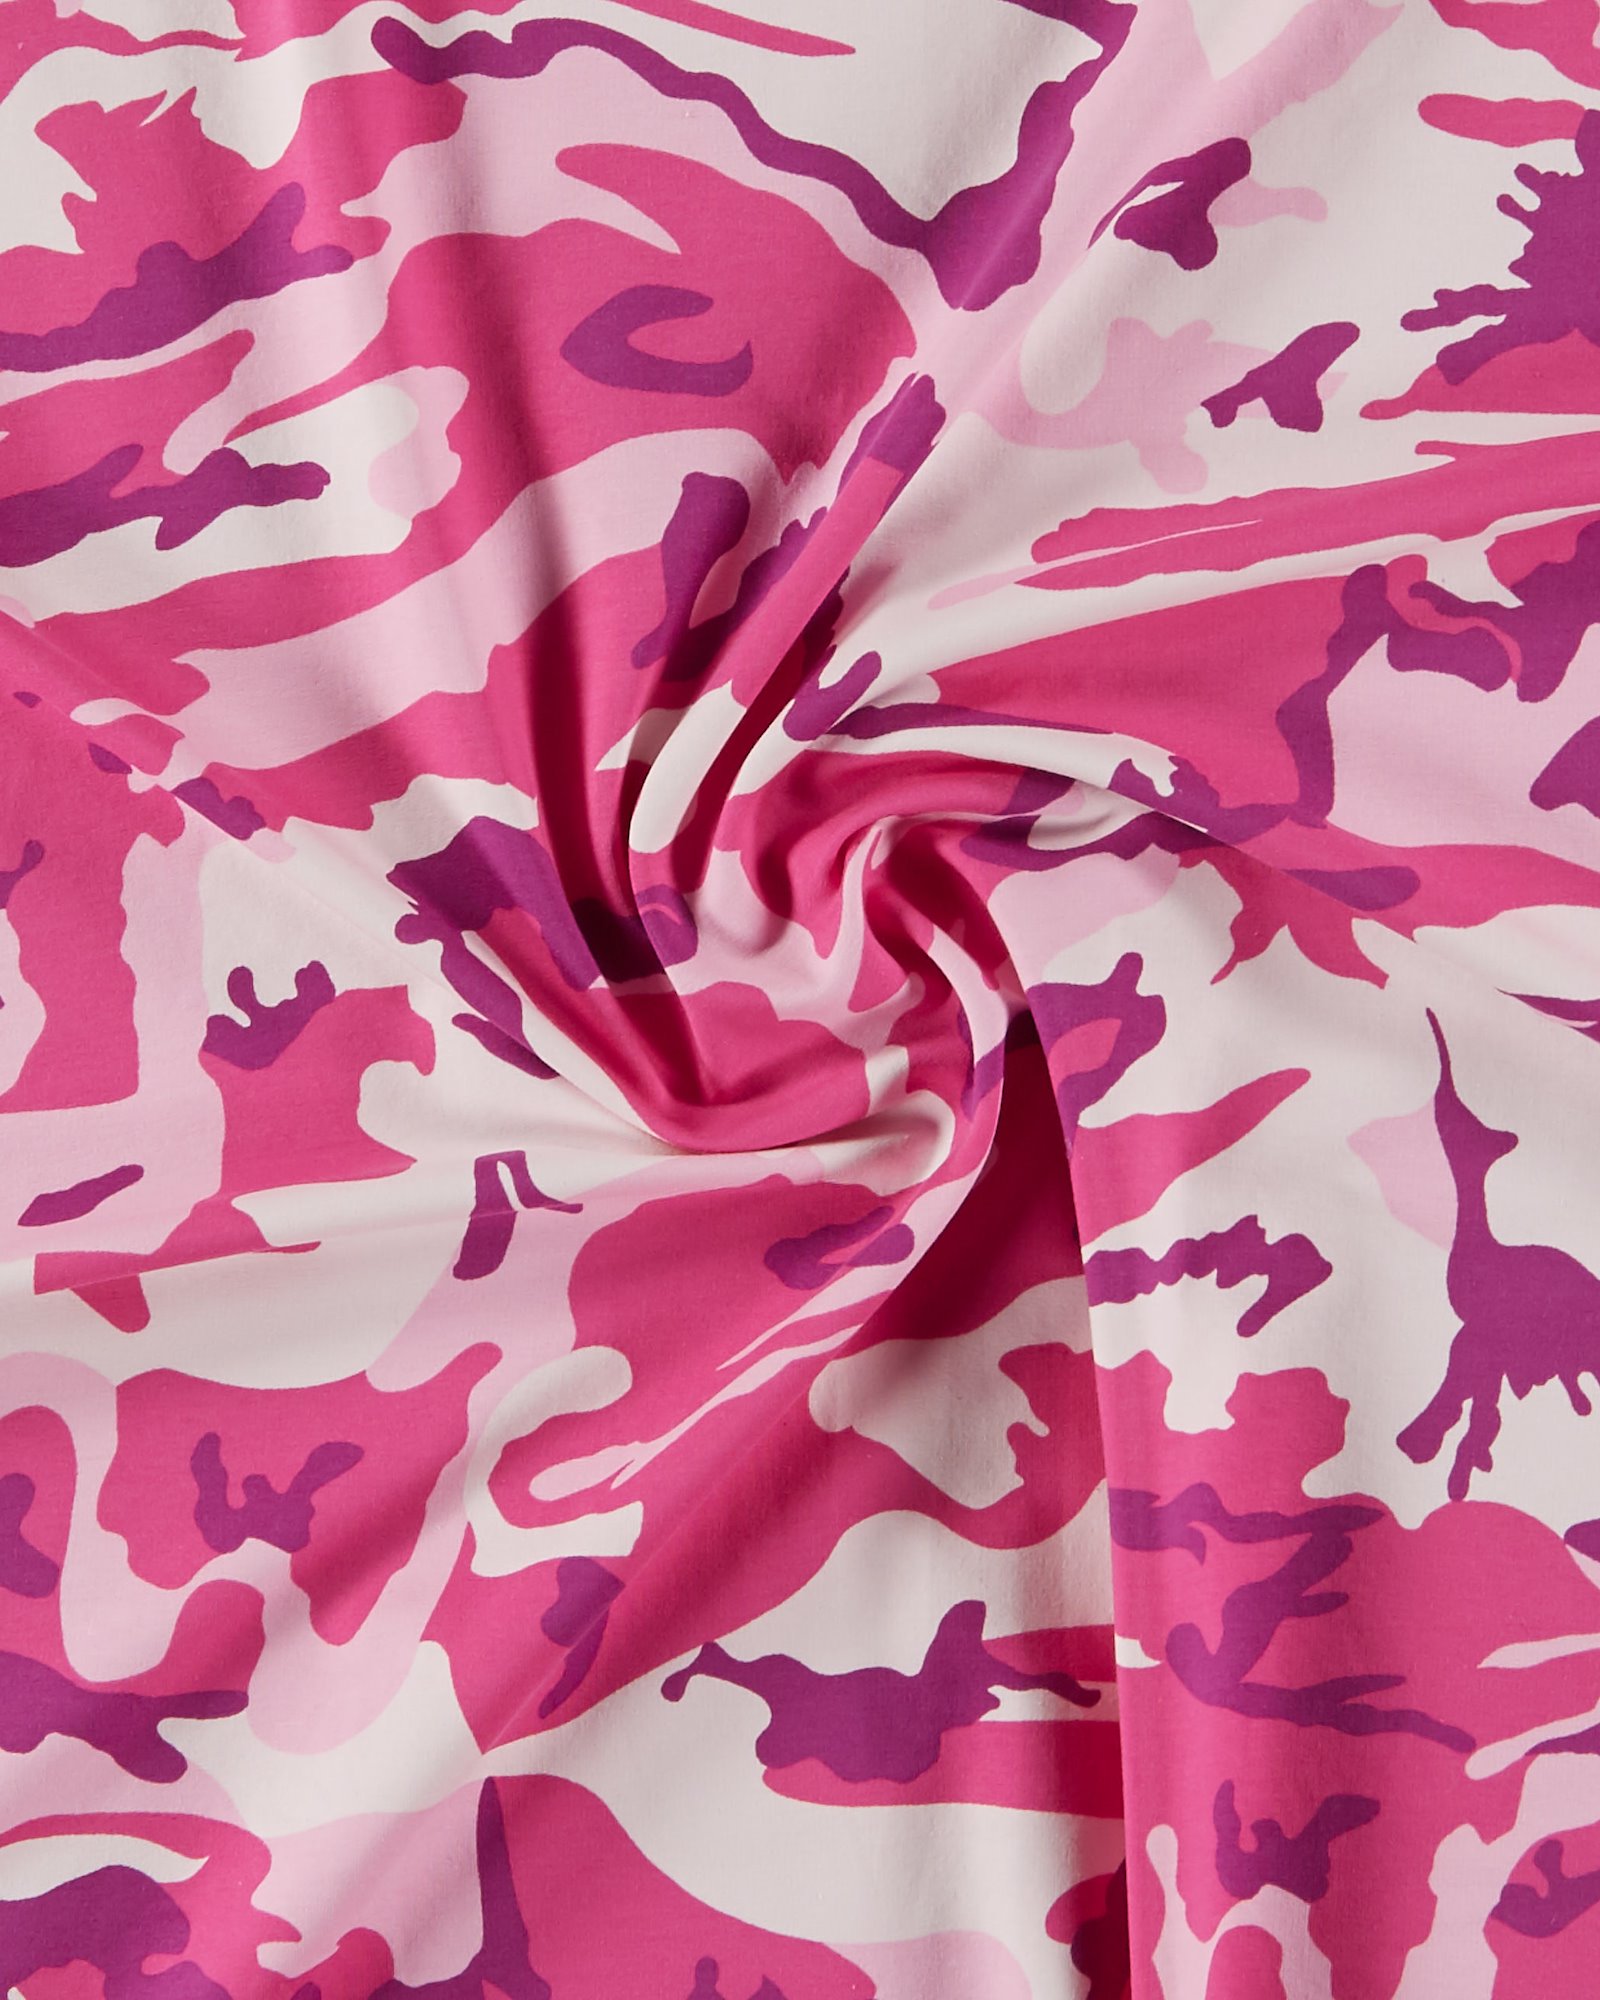 Sweat baby pink m camouflage print ang. 211935_pack